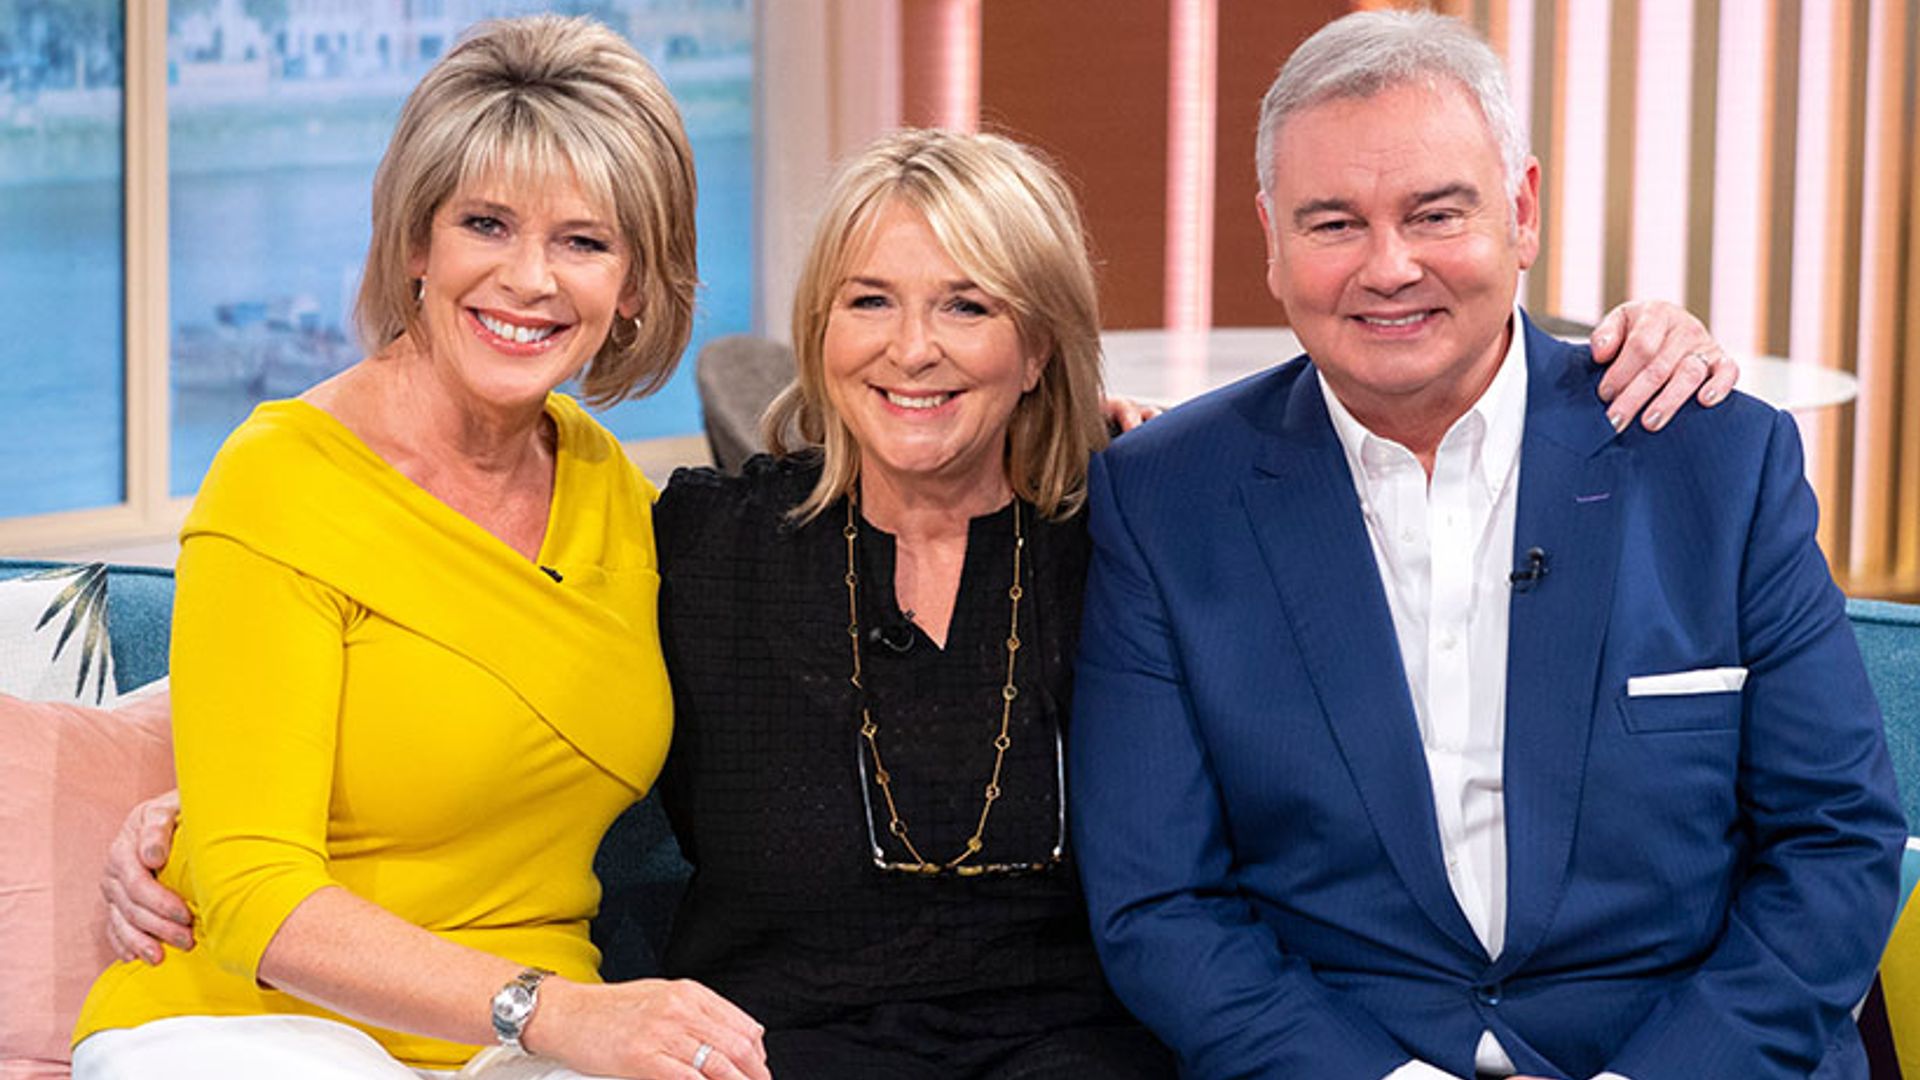 Find out why Fern Britton took over Ruth Langsford's This Morning job